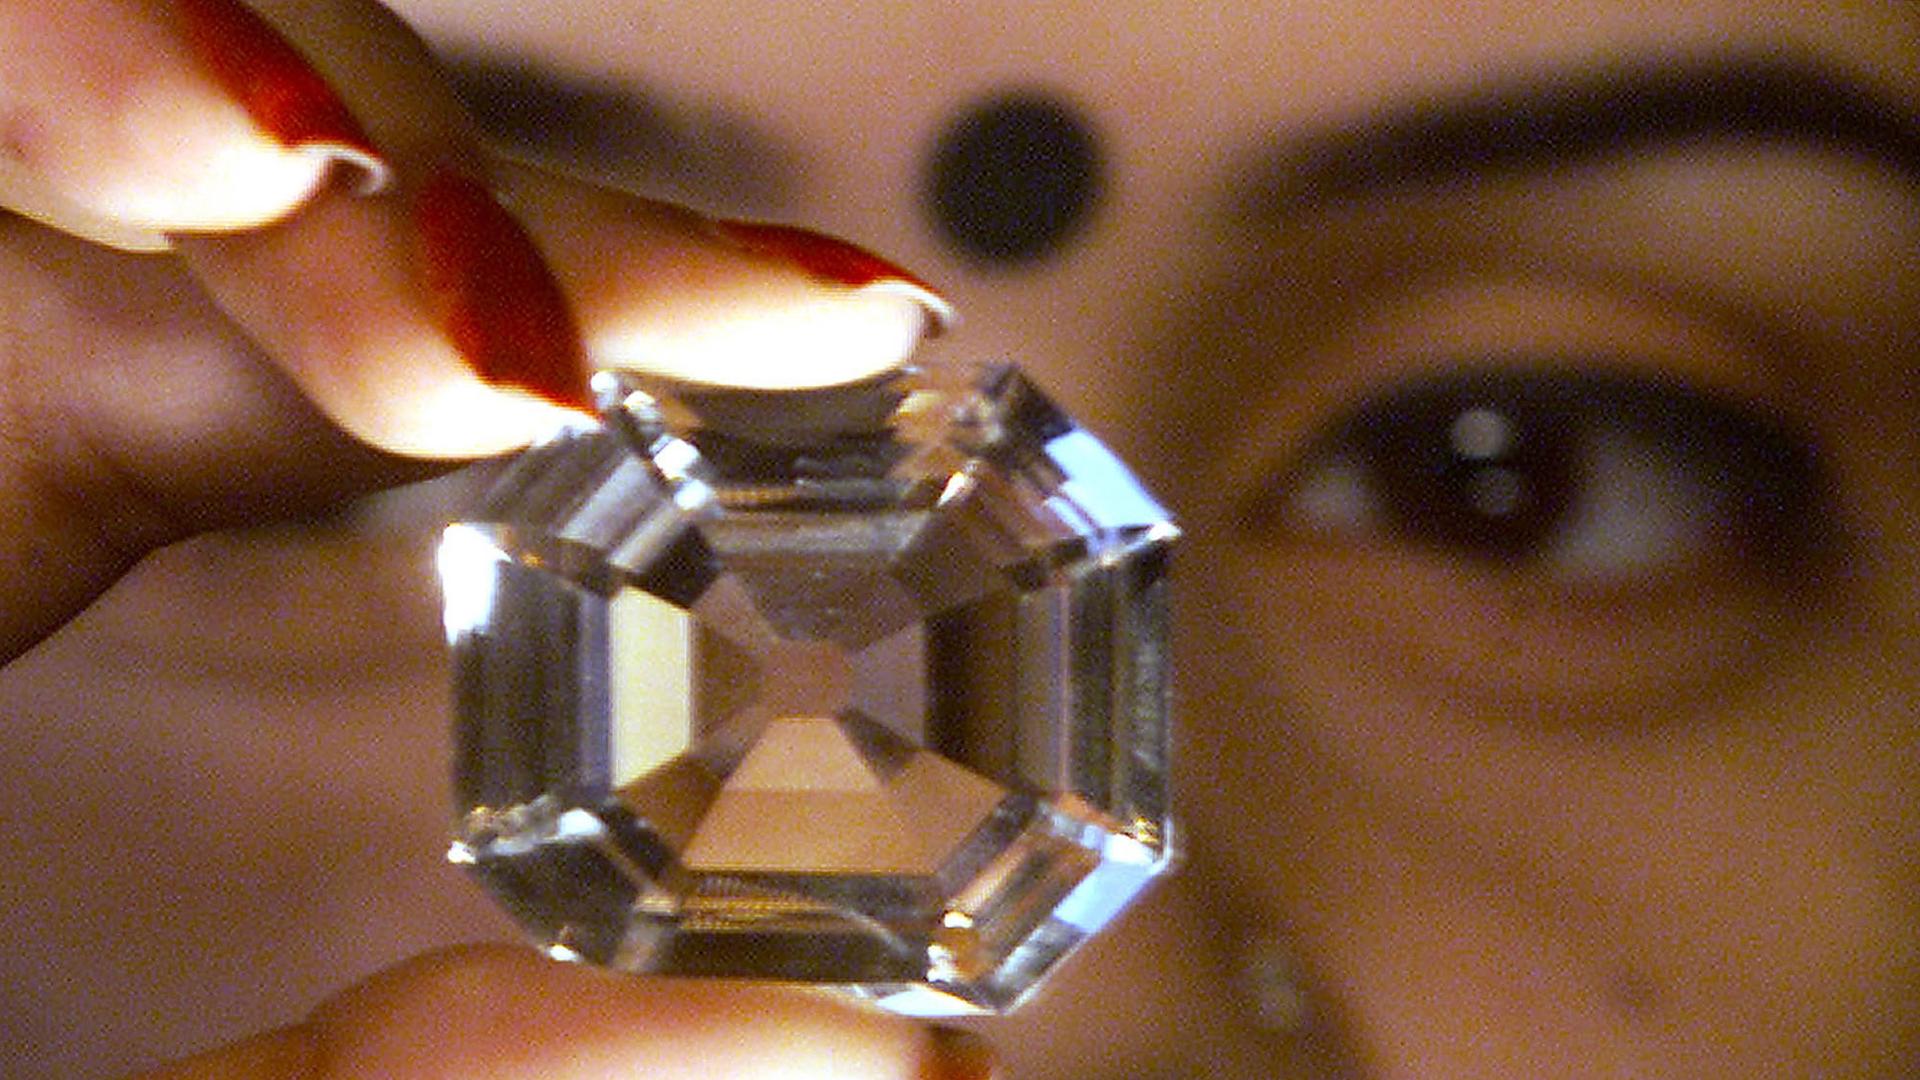 A woman holds a replica of the Koh-i-Noor diamond, during a diamond exhibition in Kolkata in 2002.